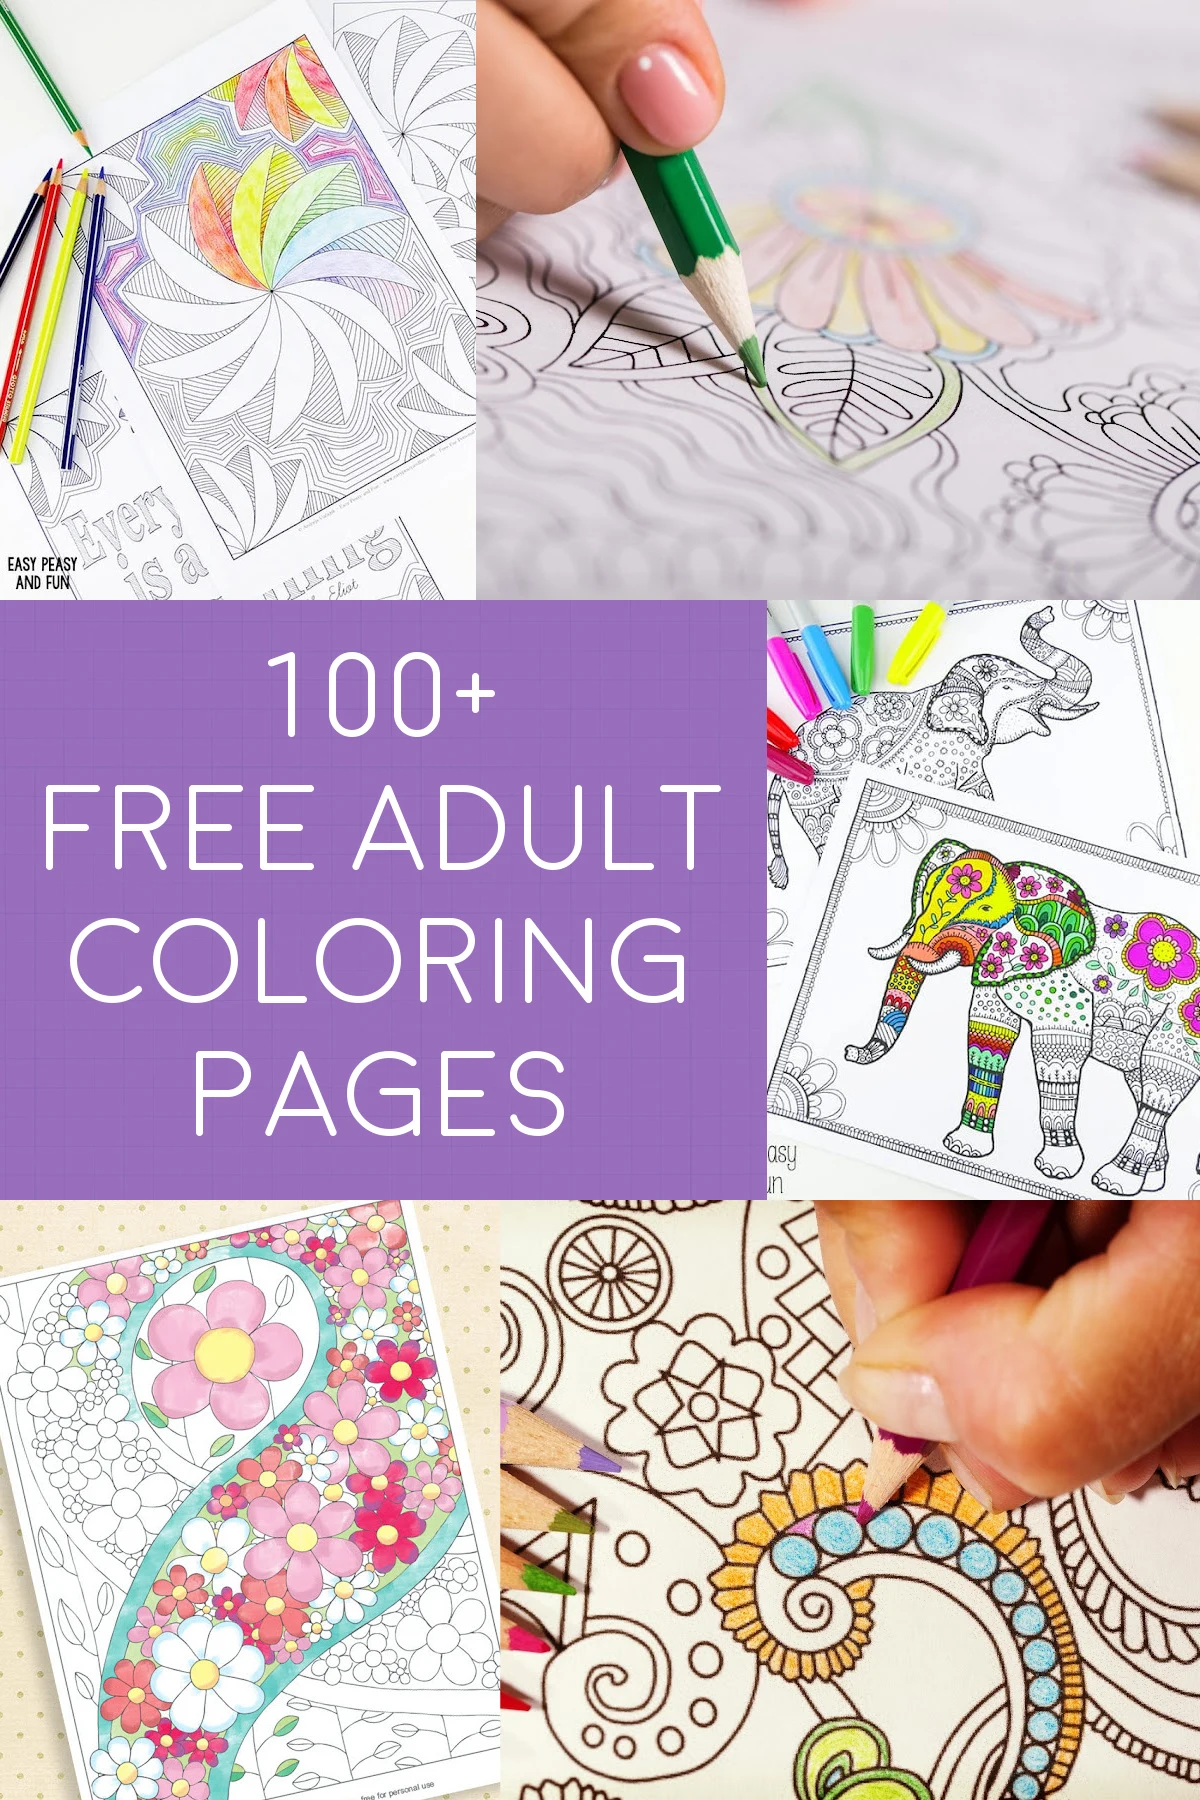 Free Adult Coloring Pages You'll Love (Over 100+!) - DIY Candy